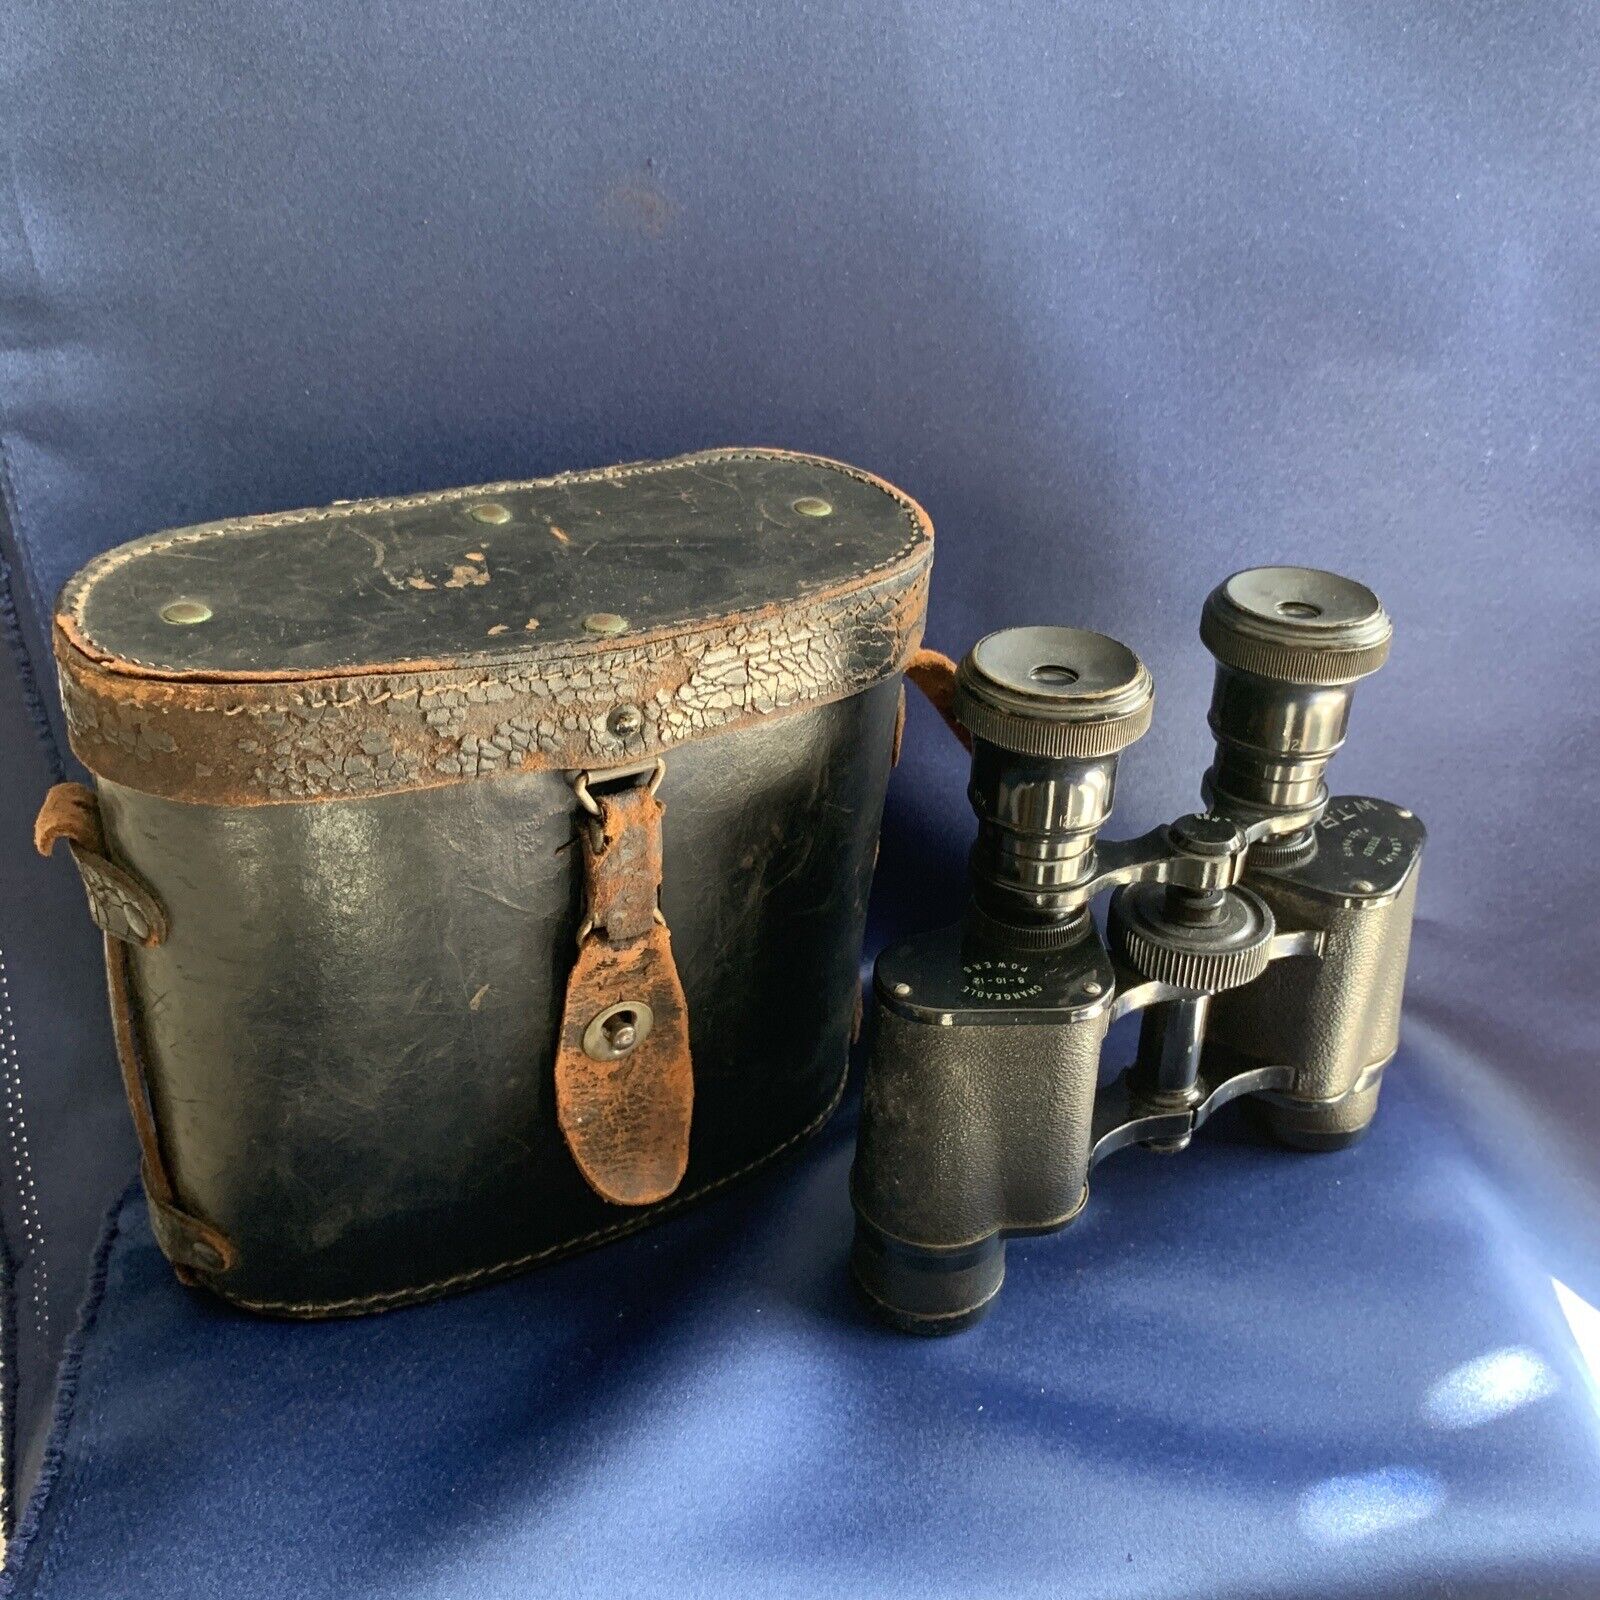 Military Binoculars Dated 1924 Lemaire Fabt Paris With Case Etched W.T. Risley